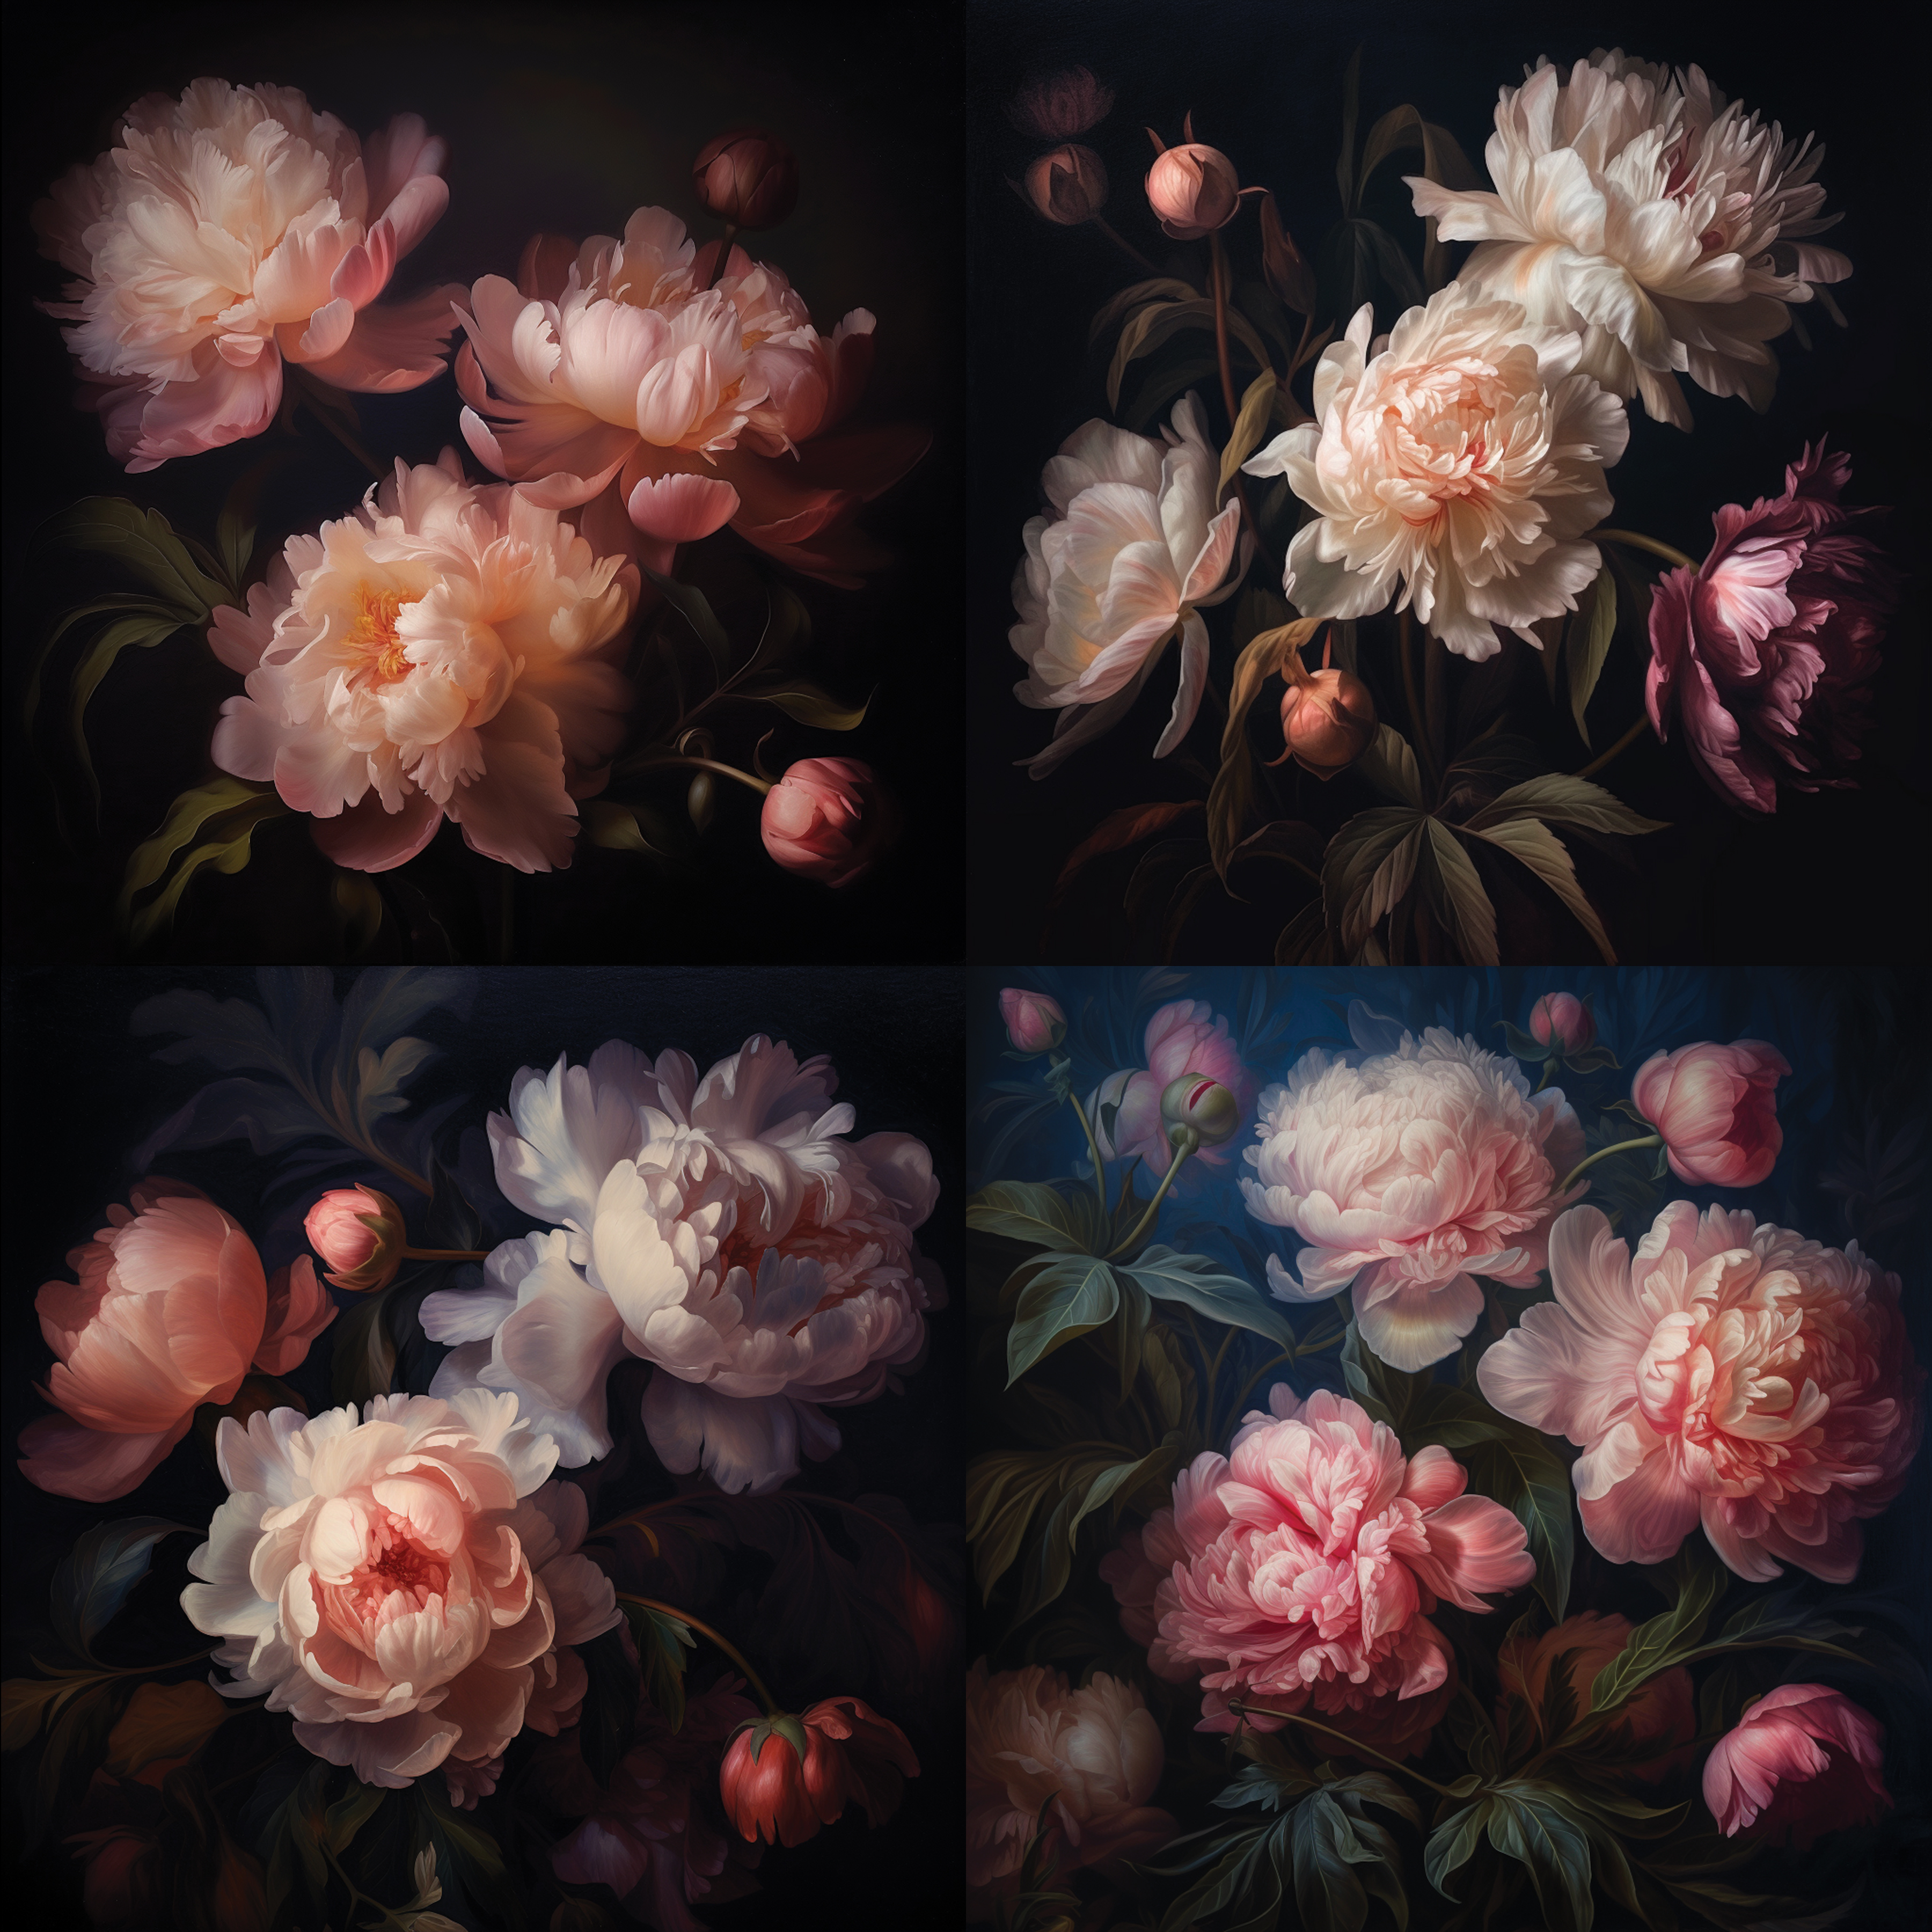 Flora design patterns Oil painting of peony flowers free image